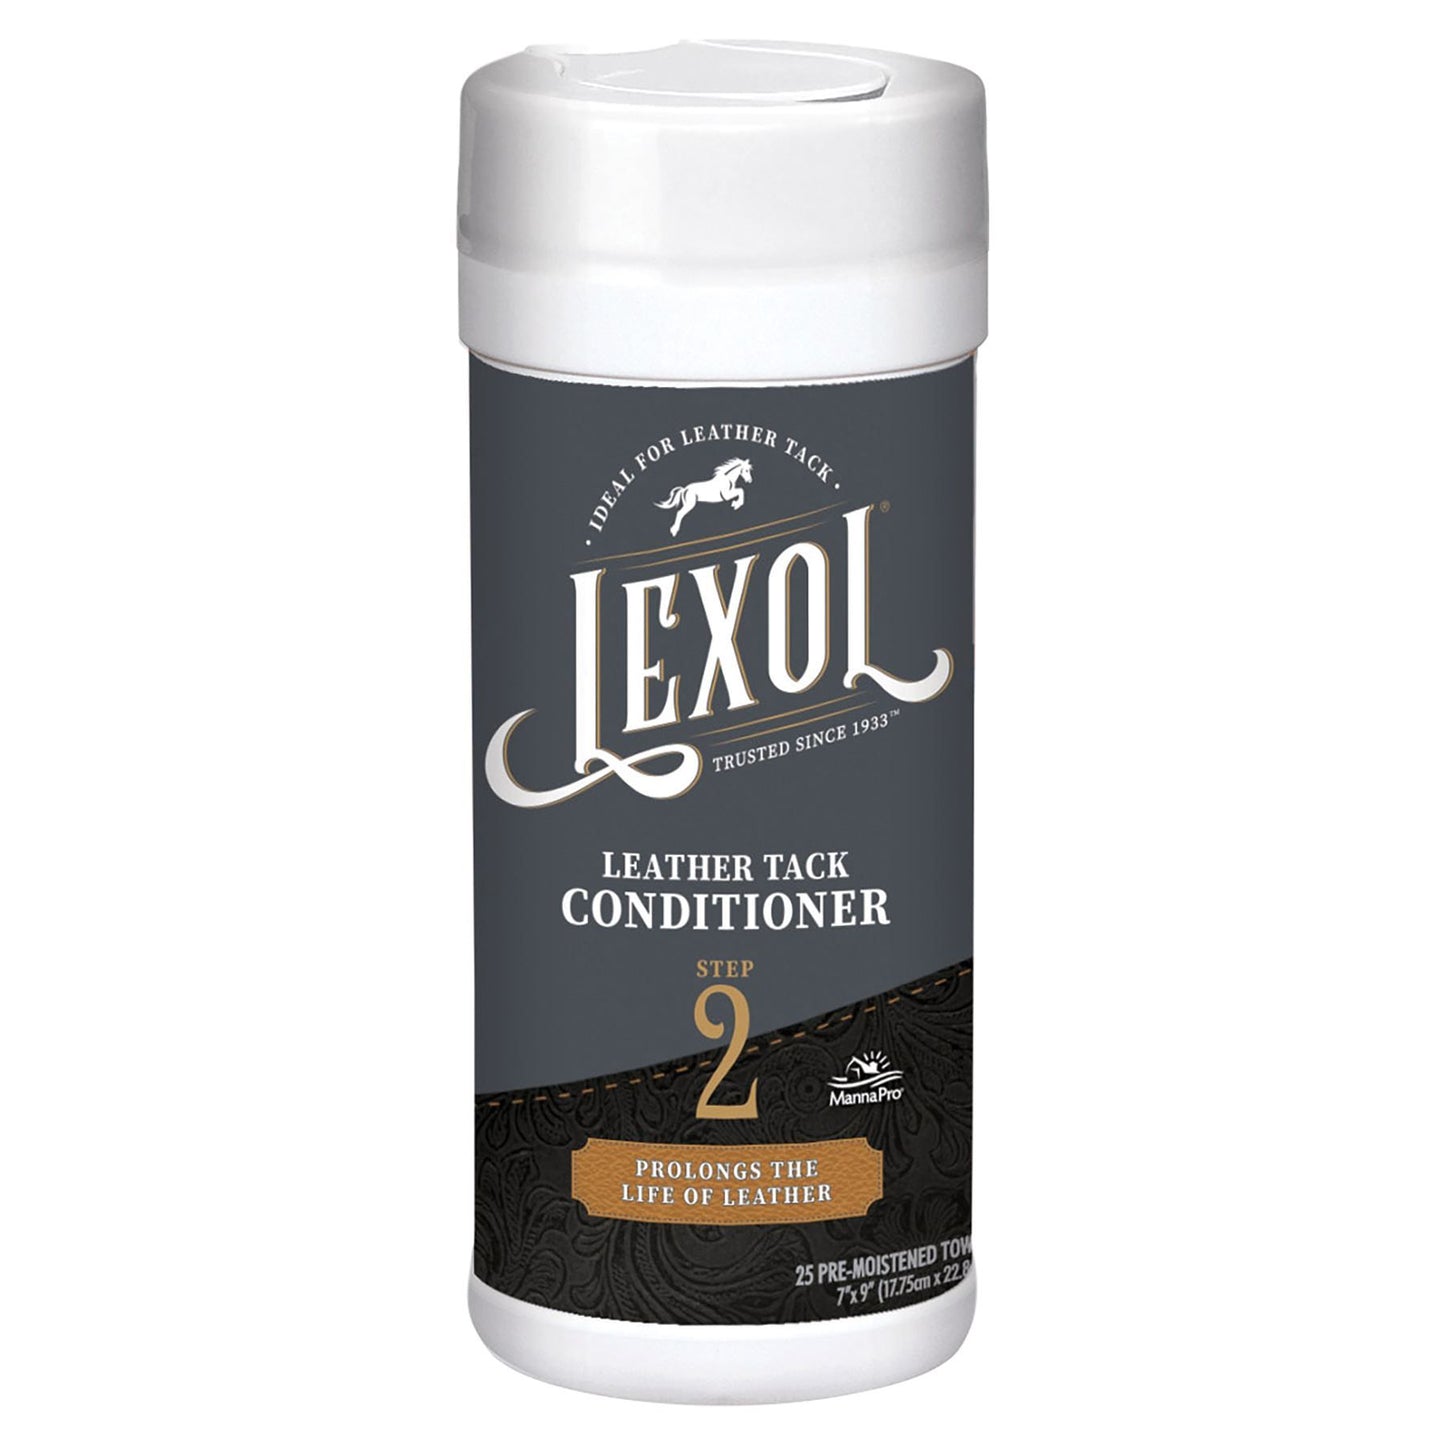 Lexol Leather Conditioner quick wipes